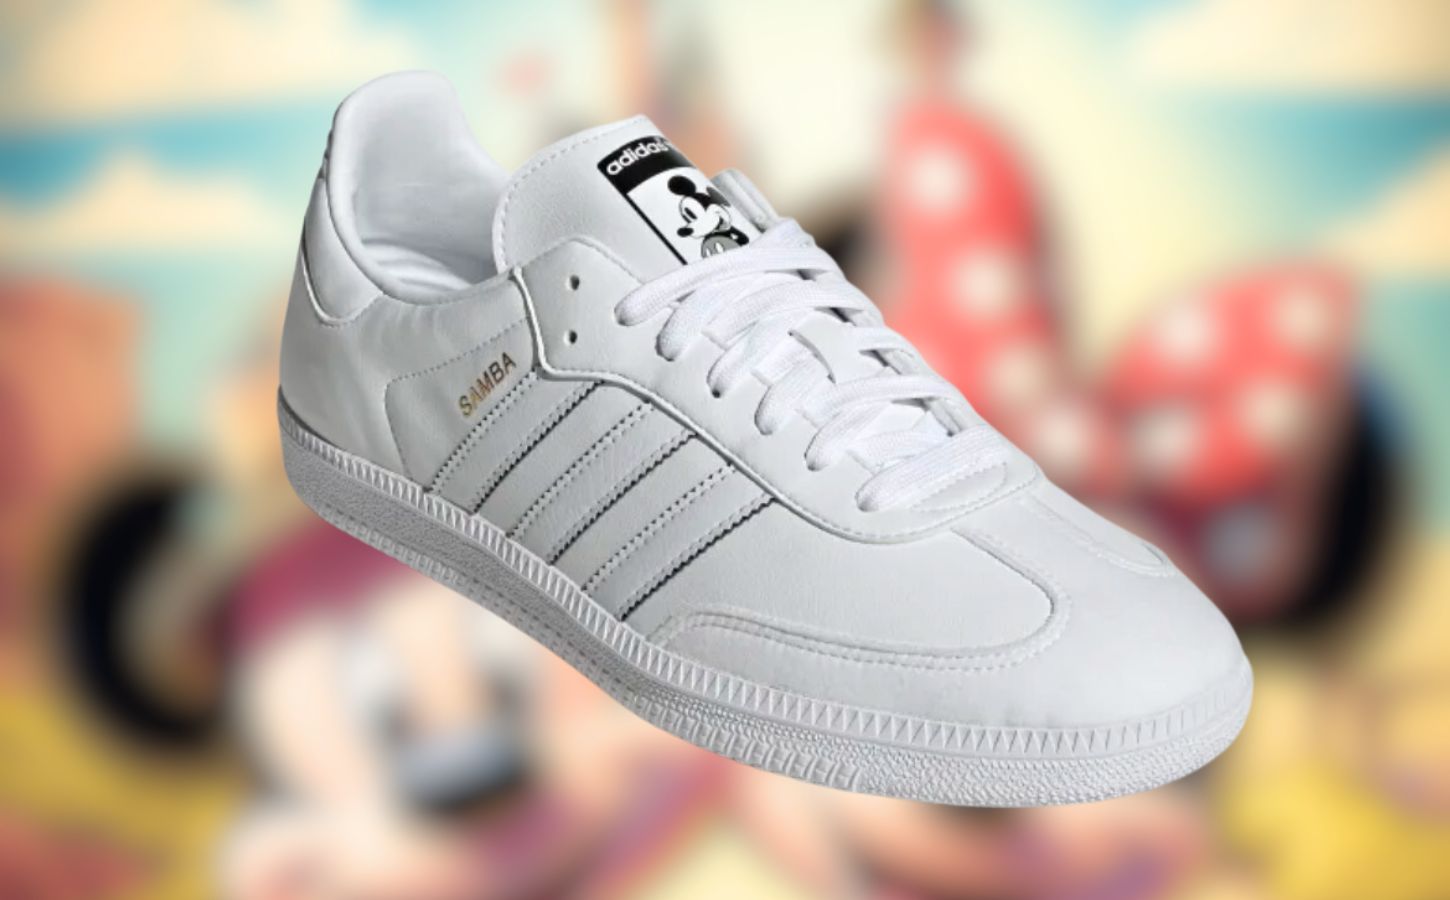 All-white vegan Adidas x Disney Samba sneakers with Mickey Mouse motifs, with a blurred image of Mickey and Minnie in the background